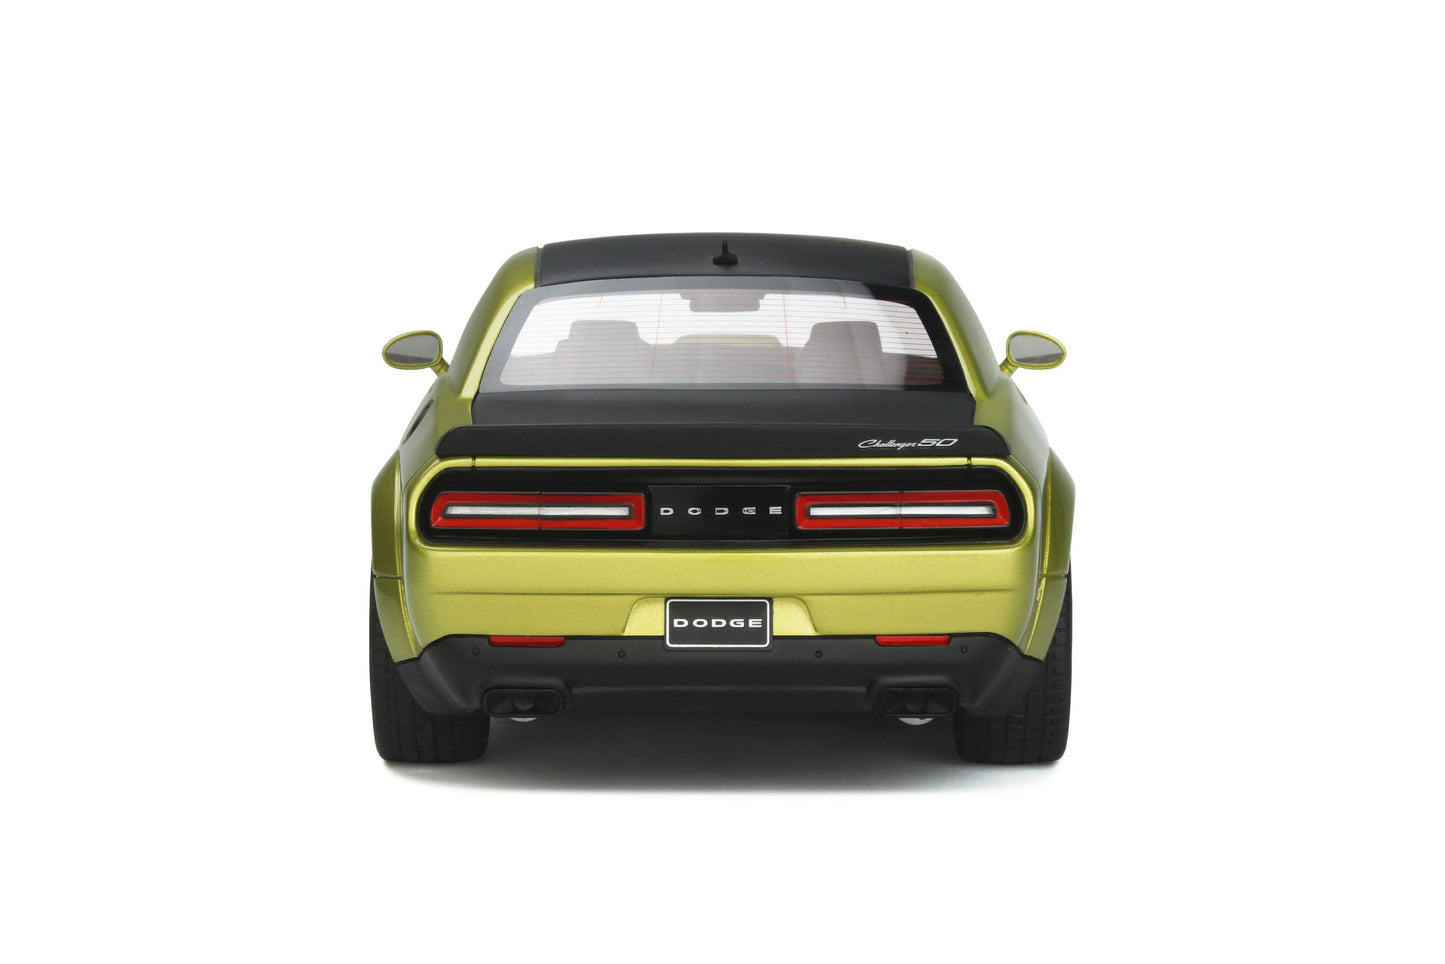 GT Spirit - Dodge Challenger R/T Scat Pack Widebody 50th Anniversary (Gold Rush) 1:18 Scale Model Car